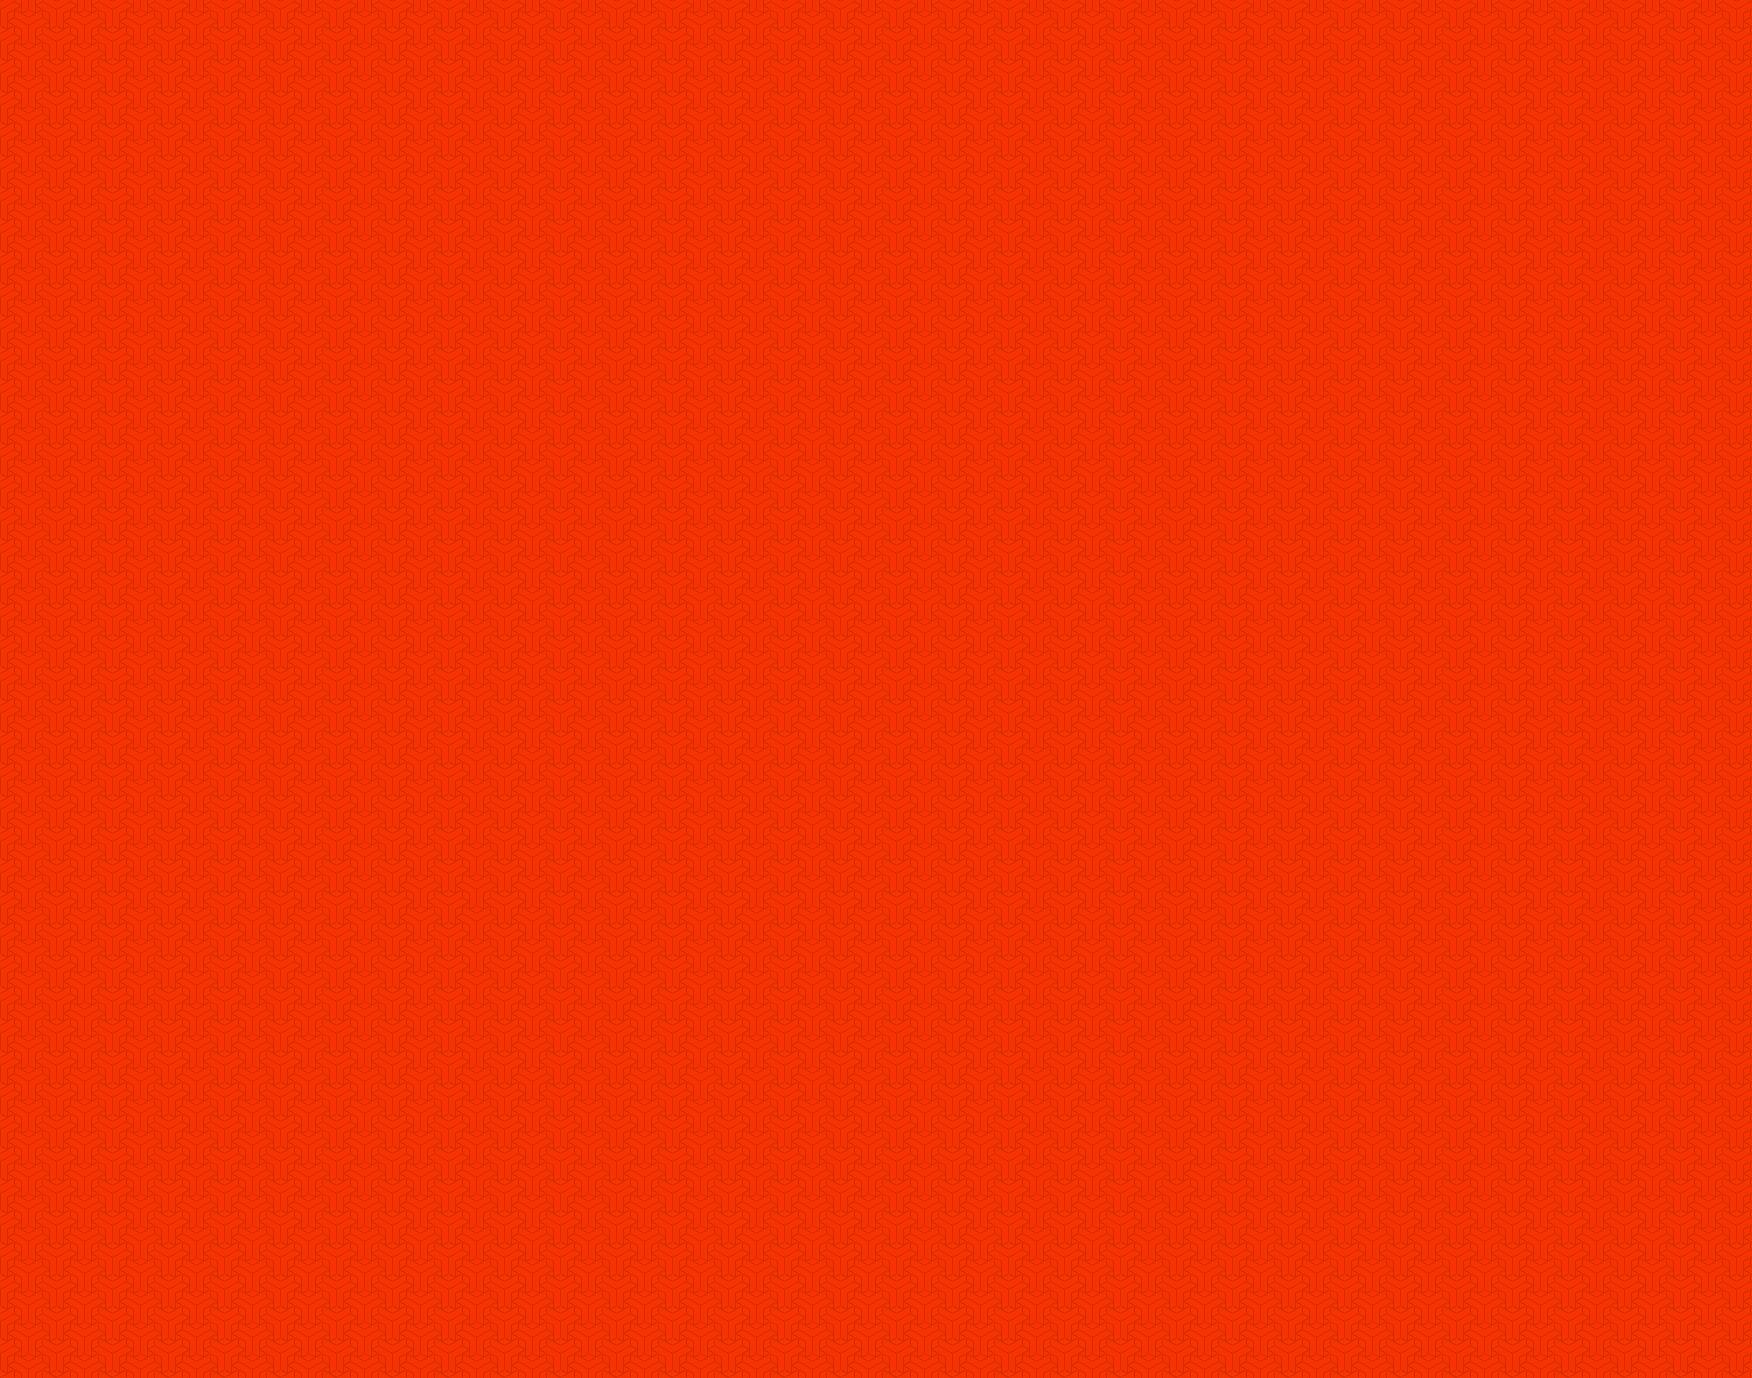 red screen